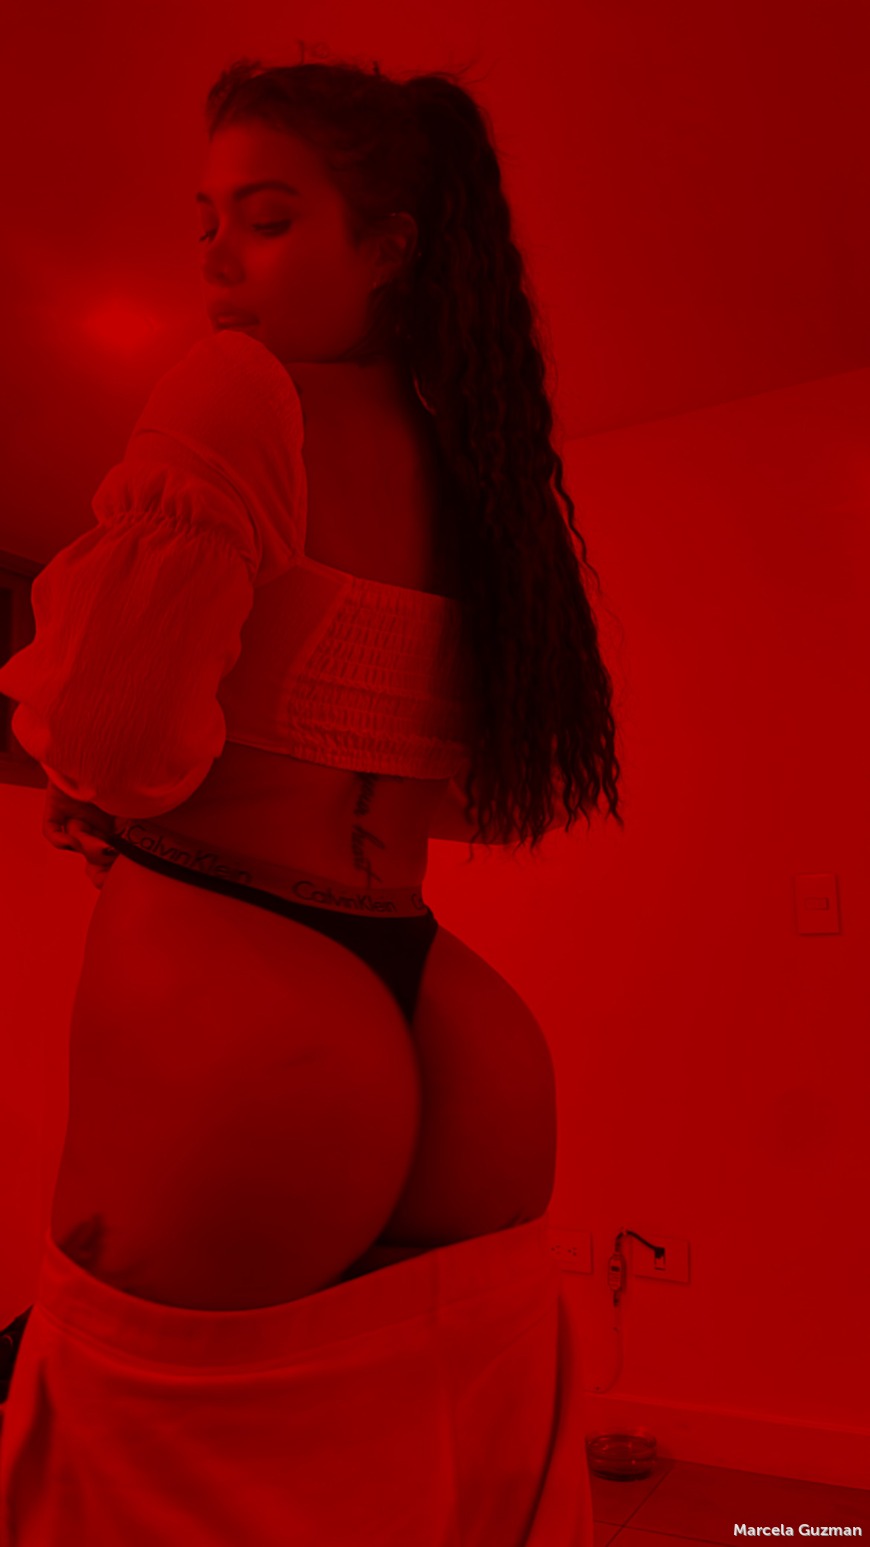 How do I look under red lights? 1